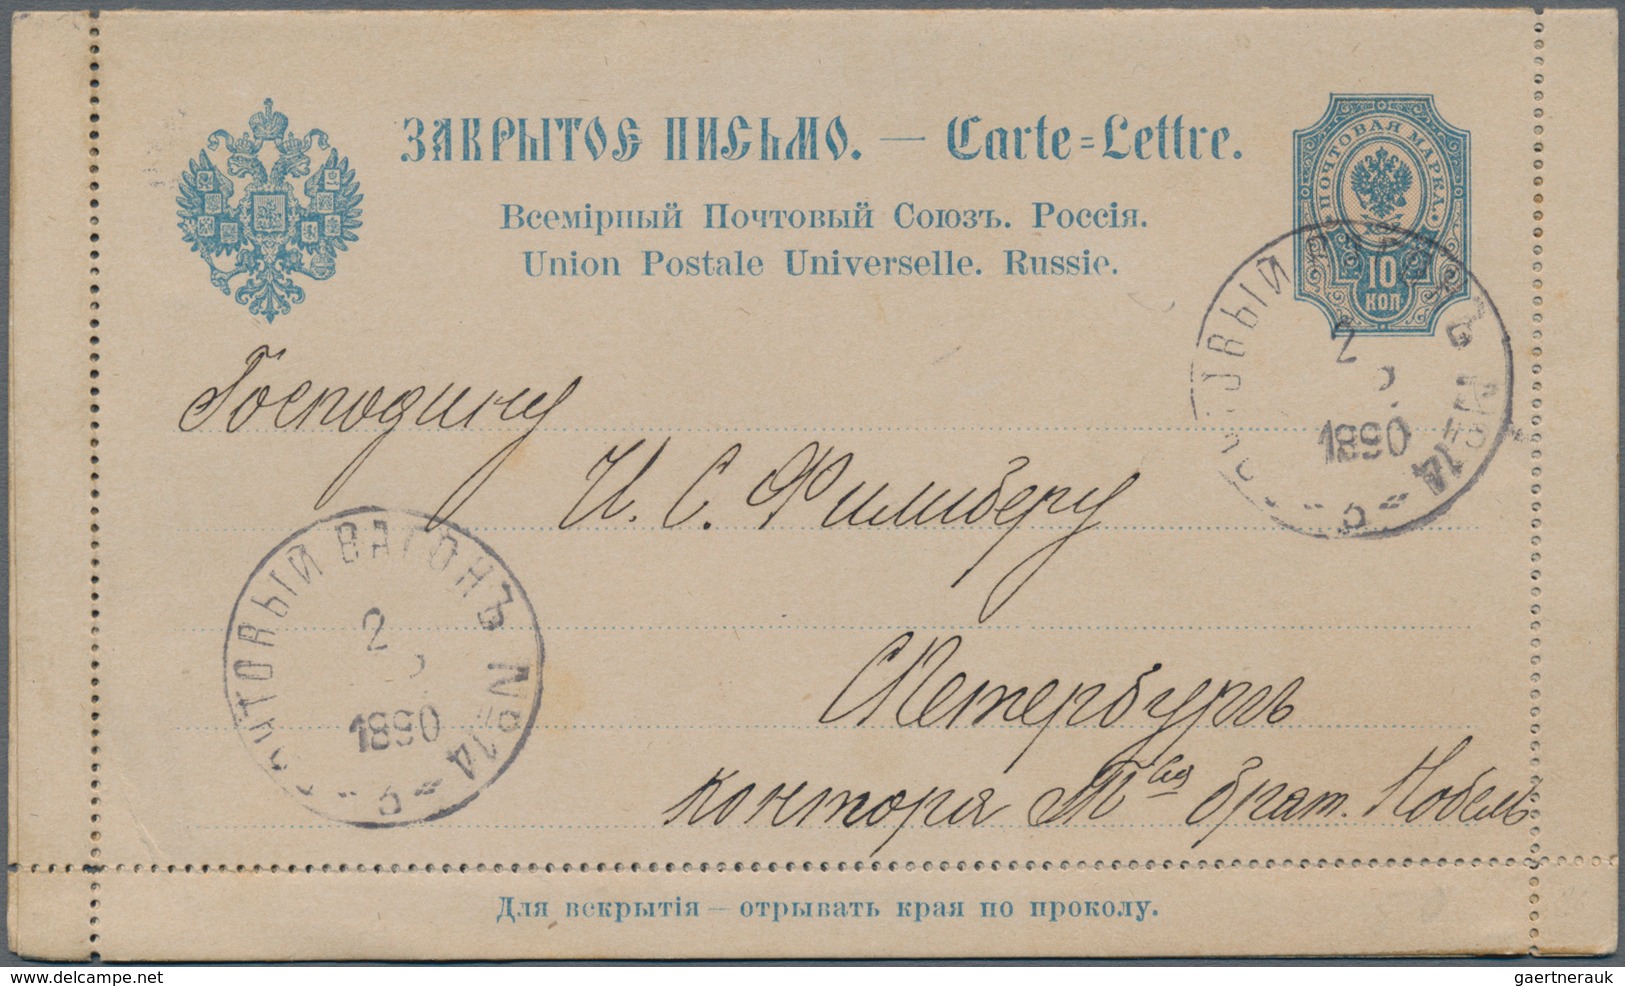 Russland - Ganzsachen: 1878/1917 holding of ca. 140 unused and used postal stationery postcards, env